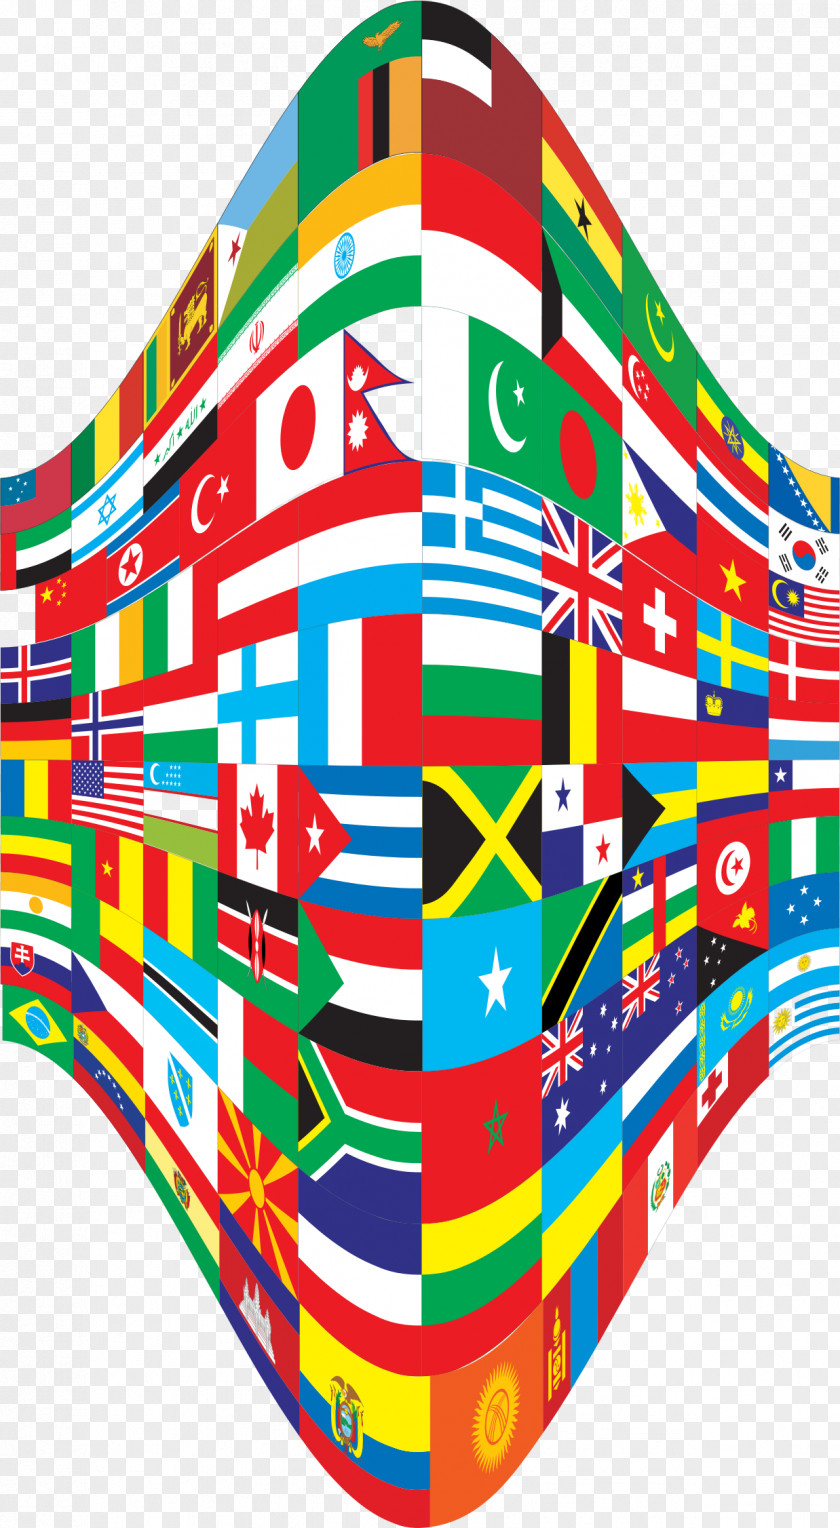 Flags Of The World Perspective Clip Art PNG